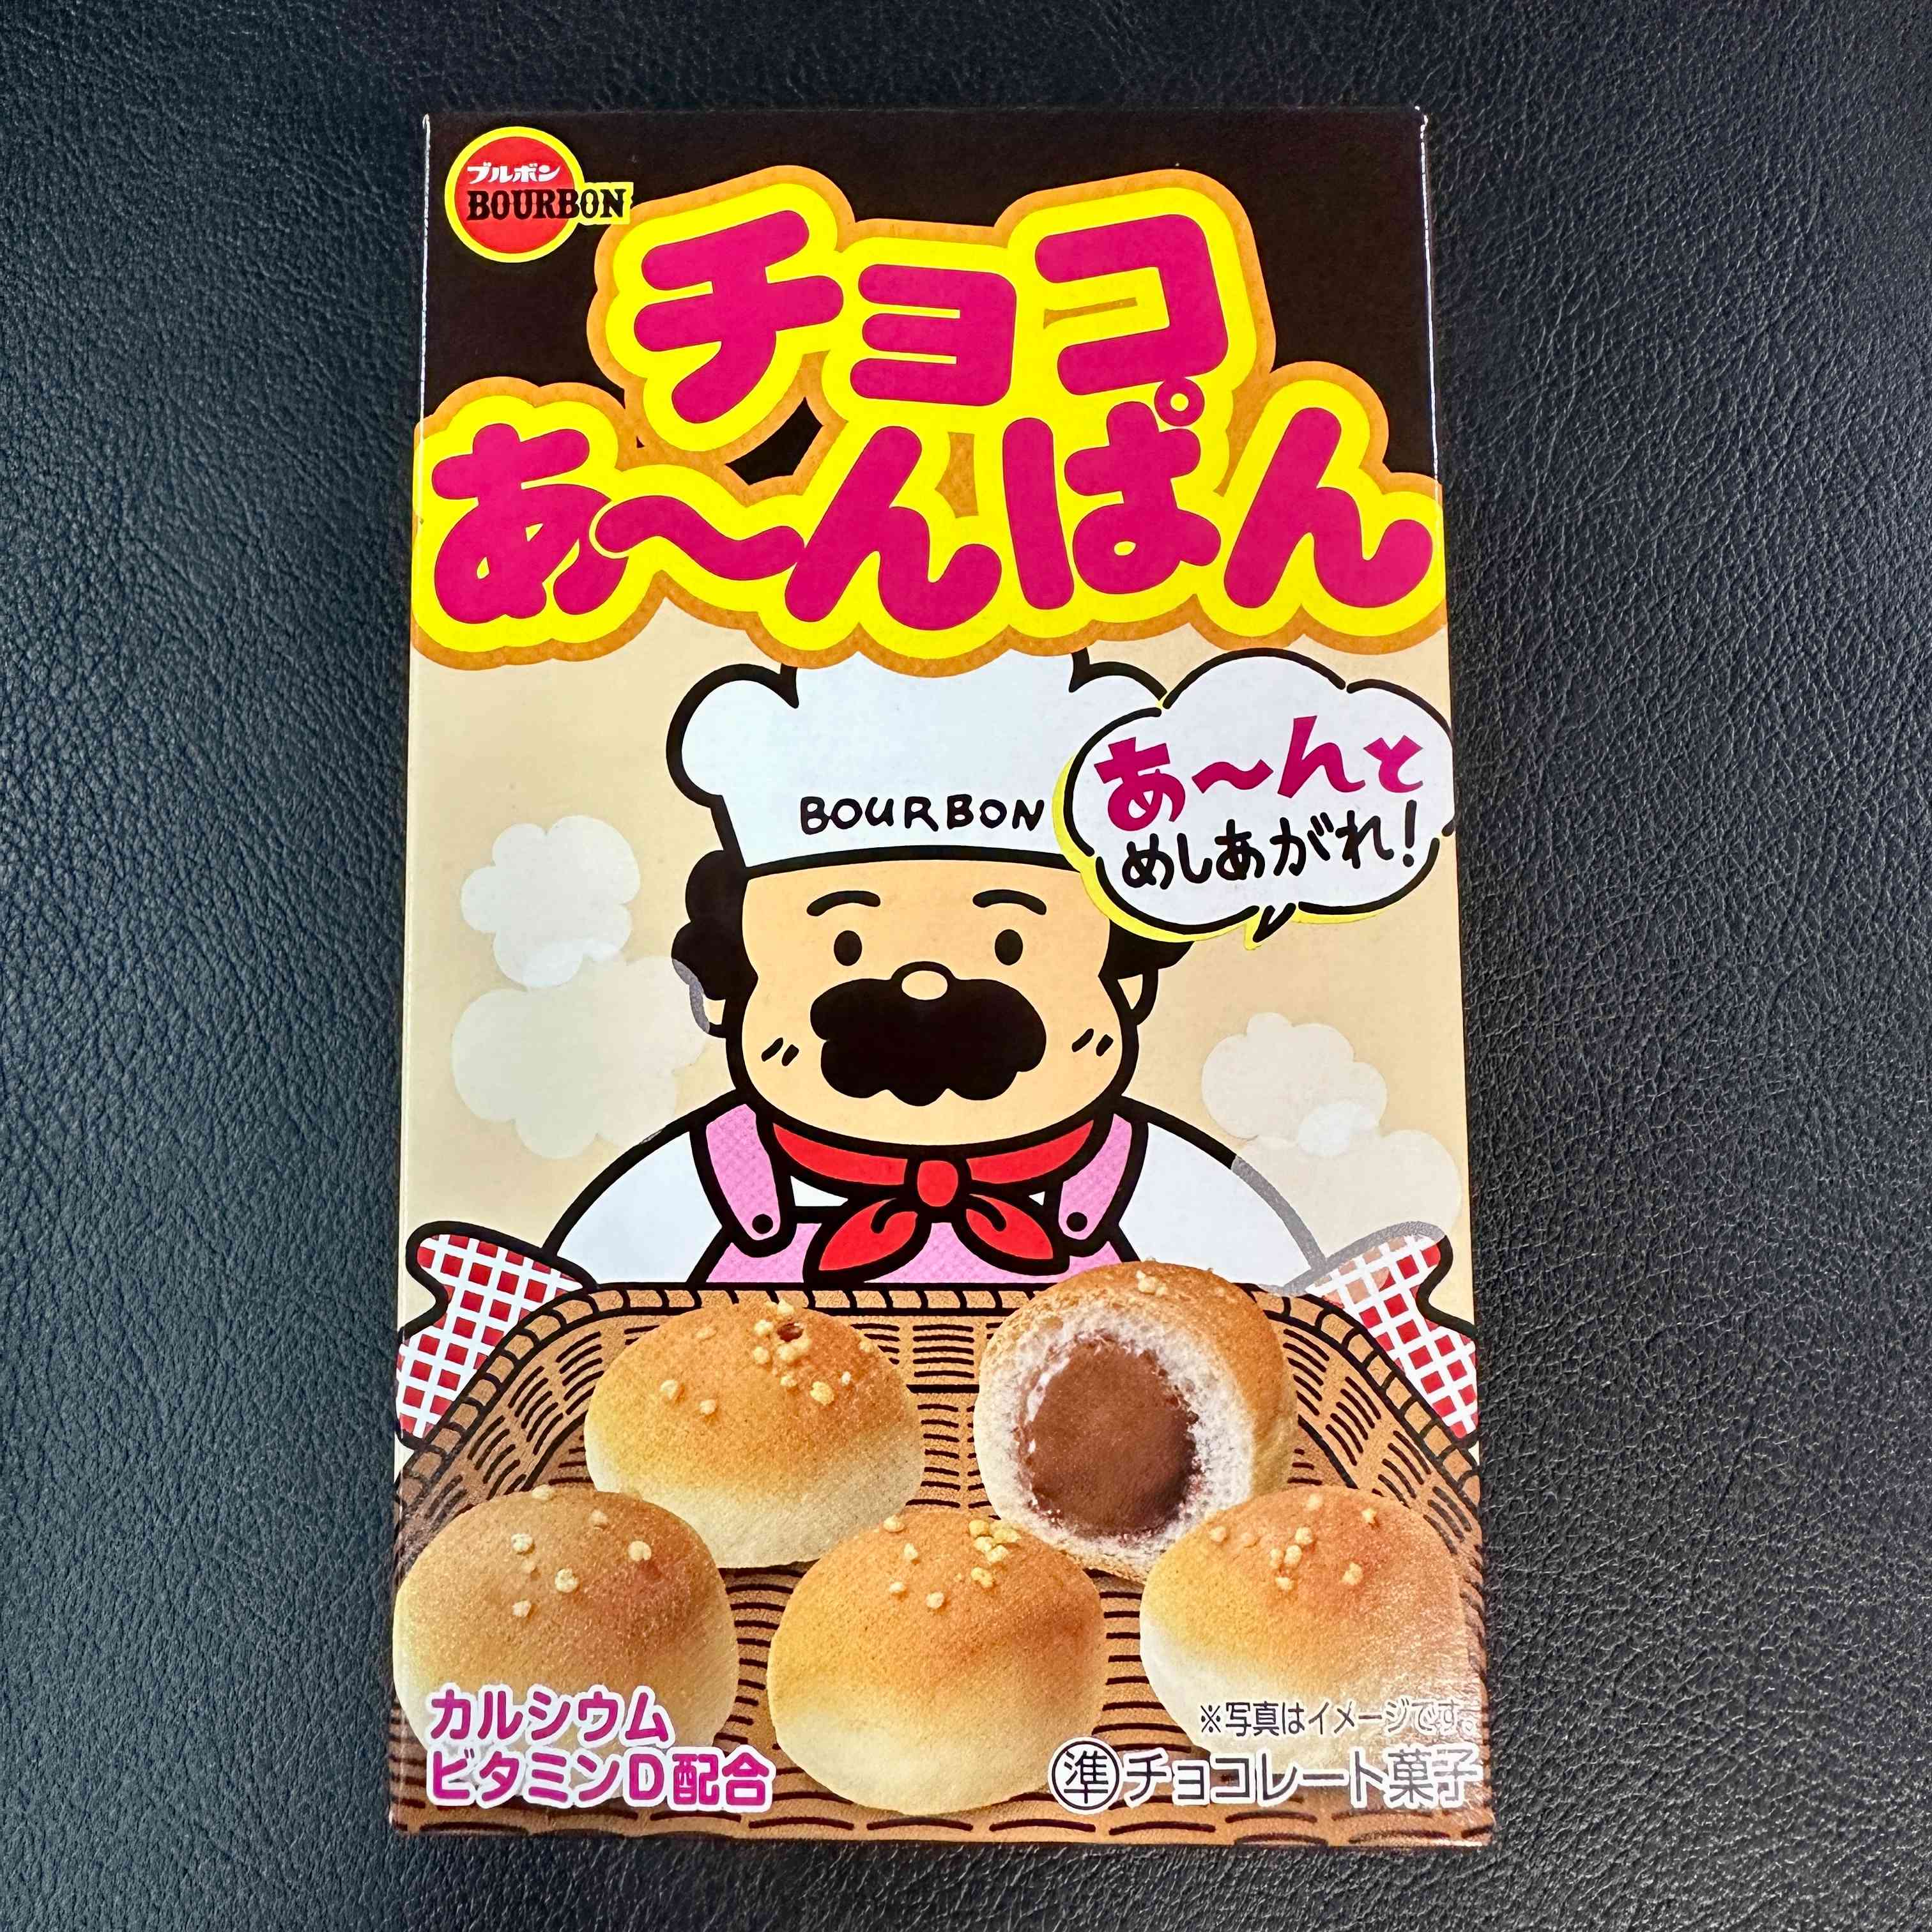 【BOURBON】Chocolate-filled bread roll.　120pieces（1case）　4800ｇ